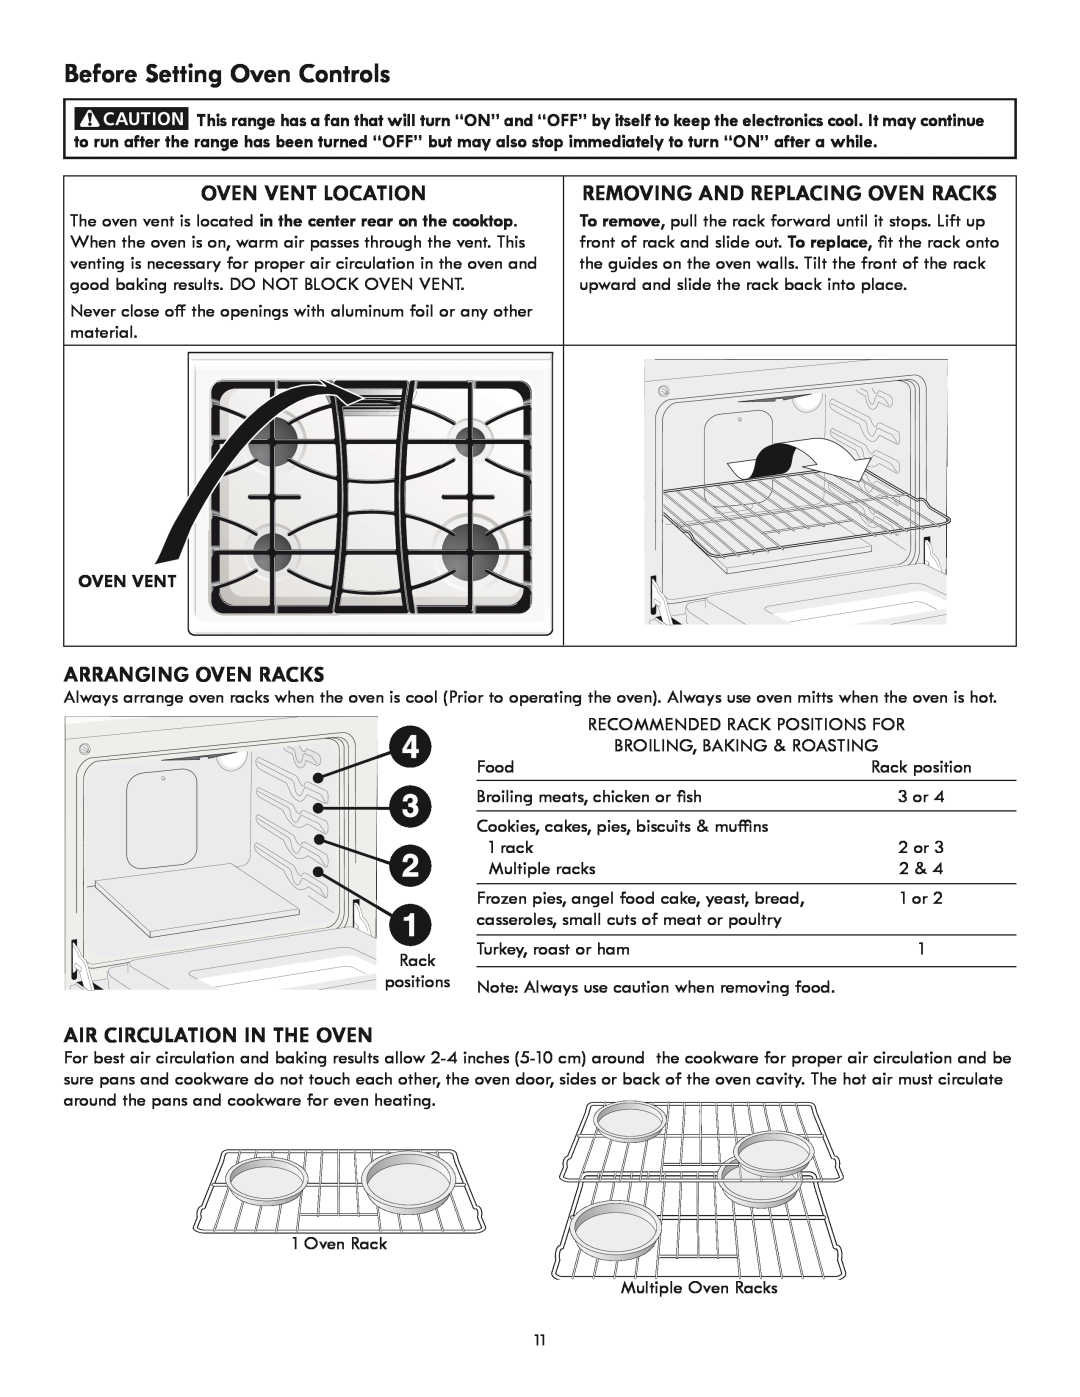 Kenmore 318205869A manual Before Setting Oven Controls, Oven Vent Location, Removing and Replacing Oven Racks 